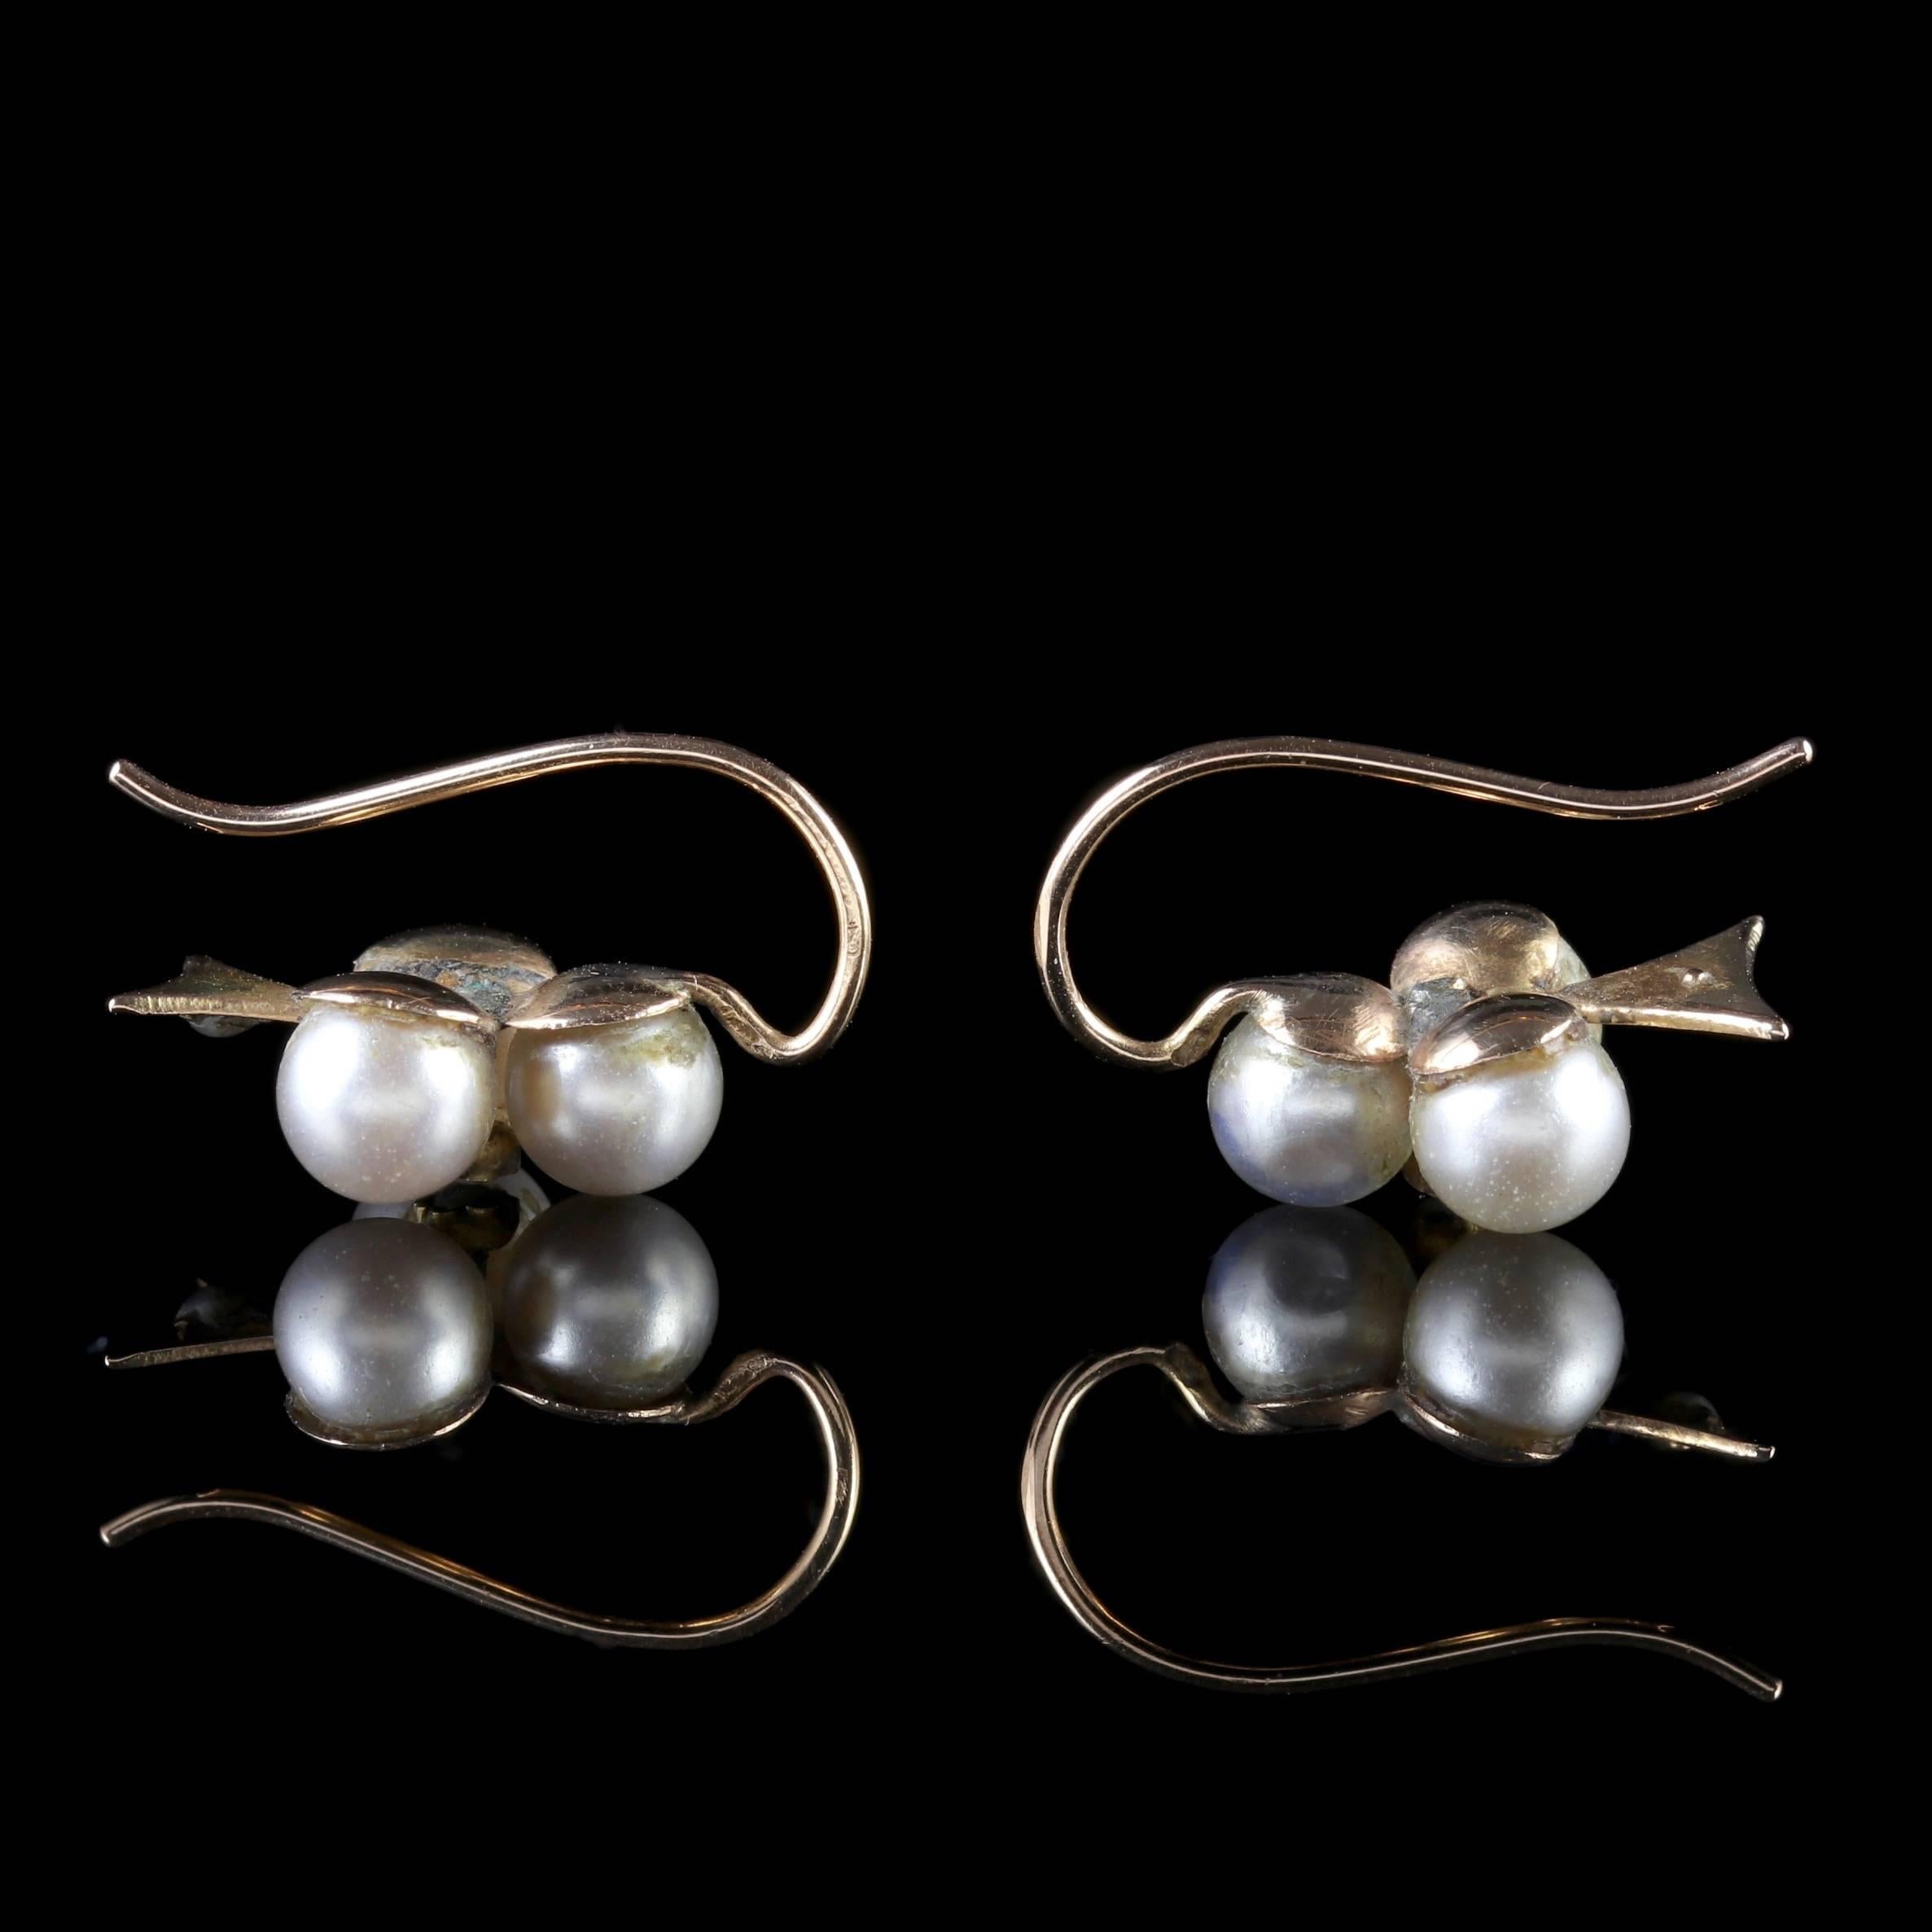 Antique Victorian Pearl Earrings 18 Carat Gold, circa 1900 Boxed 2